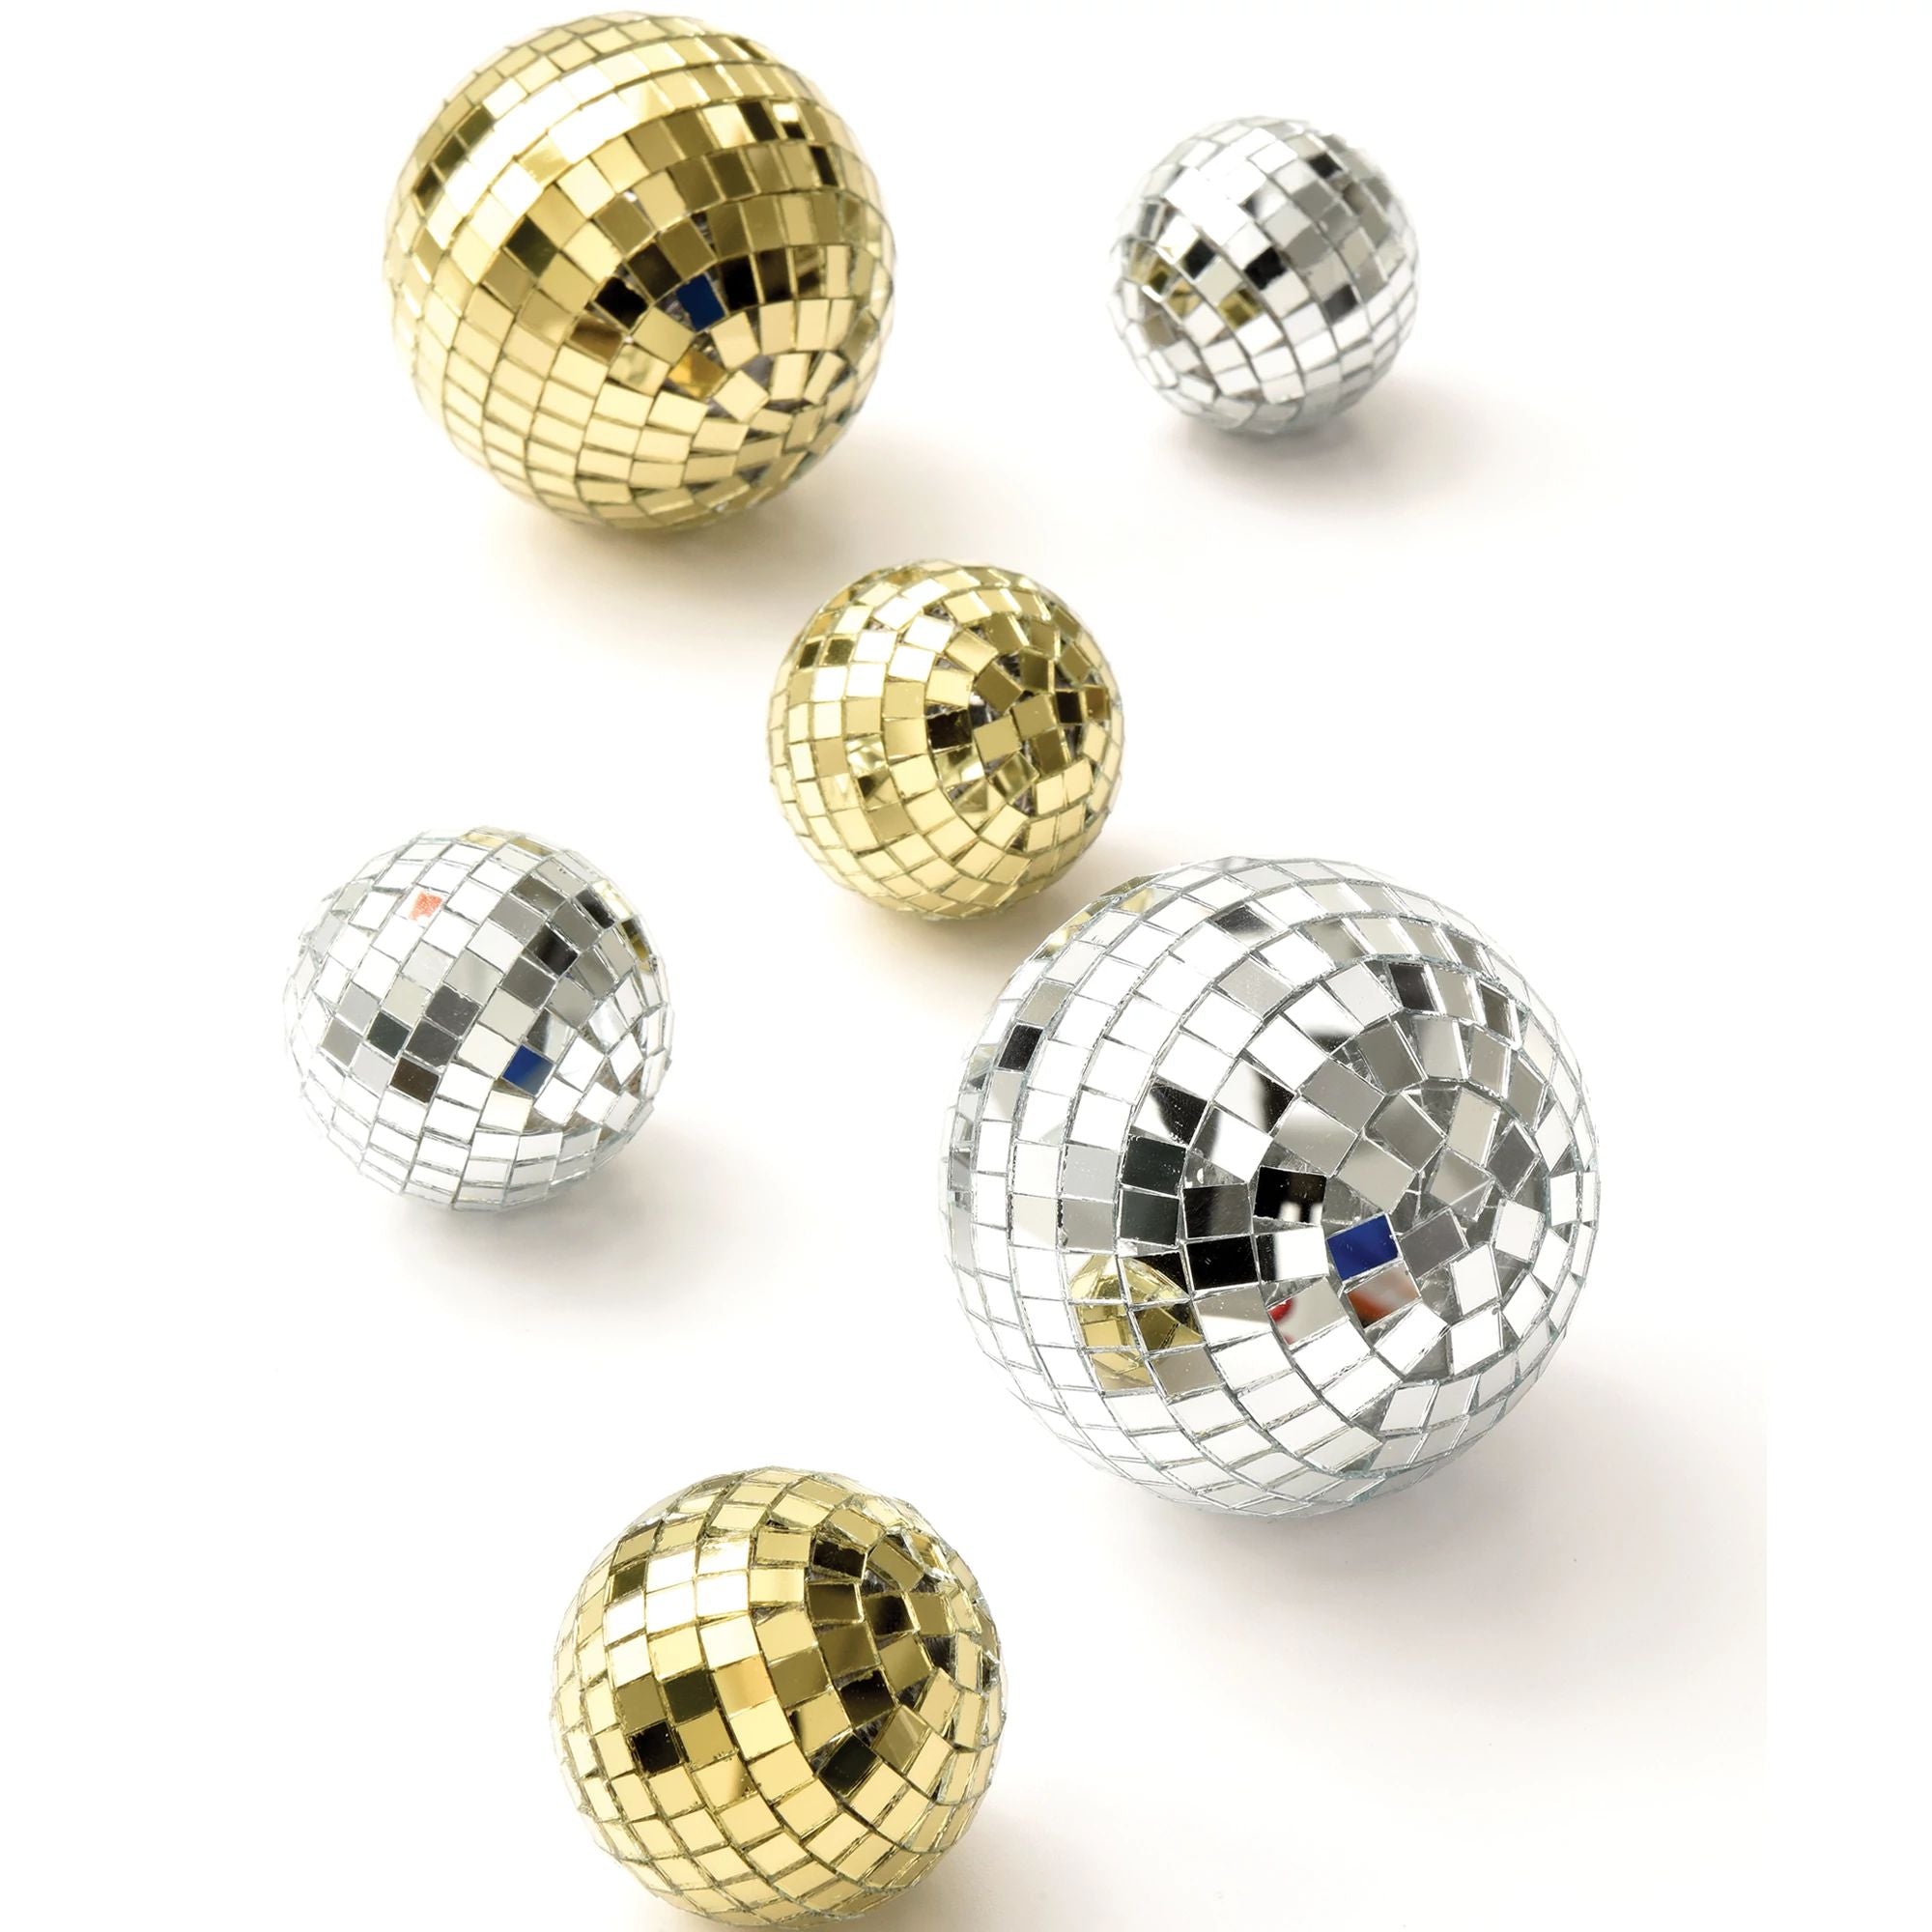 Amscan HOLIDAY: NEW YEAR'S New Year's Disco Ball Set